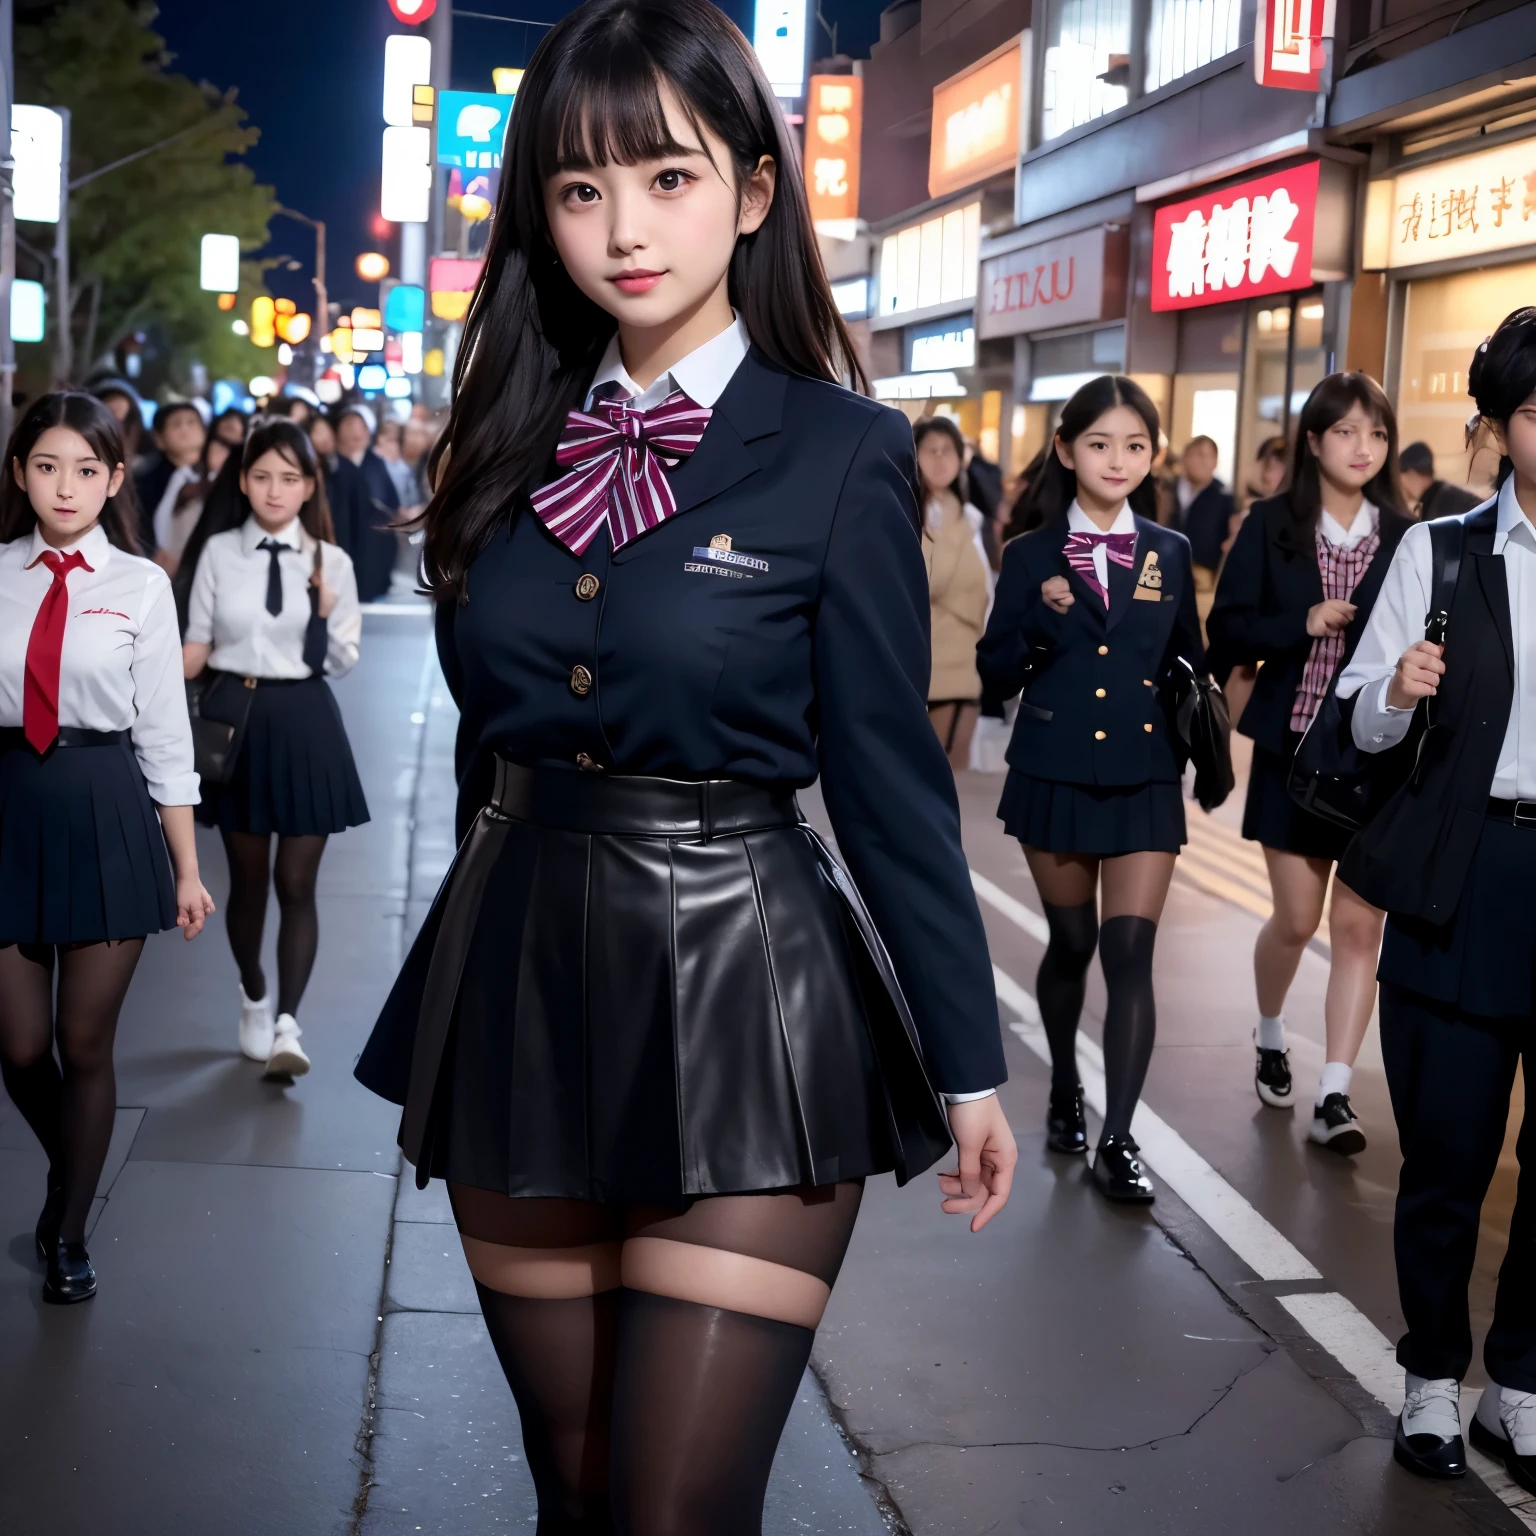 low angle shot、big breasts、Shoes are visible、super treet snap、tall, A baby-faced gal woman wearing a short skirt and bow tie is standing in a neon street at night、high school student、Thin calf、japanese girl、Winter clothes、Wearing Japanese school uniform、Japanese school black uniform、Wearing a surreal high 、girl in uniform、Wearing a dark blue uniform、Full body Esbian、nice skin、glowing skin、nice thighicro hining thighs、Plump thighs、She wears black tights that show her skin、leather shoes、Japanese high school 、Nogizaka Idol、inviting eyes